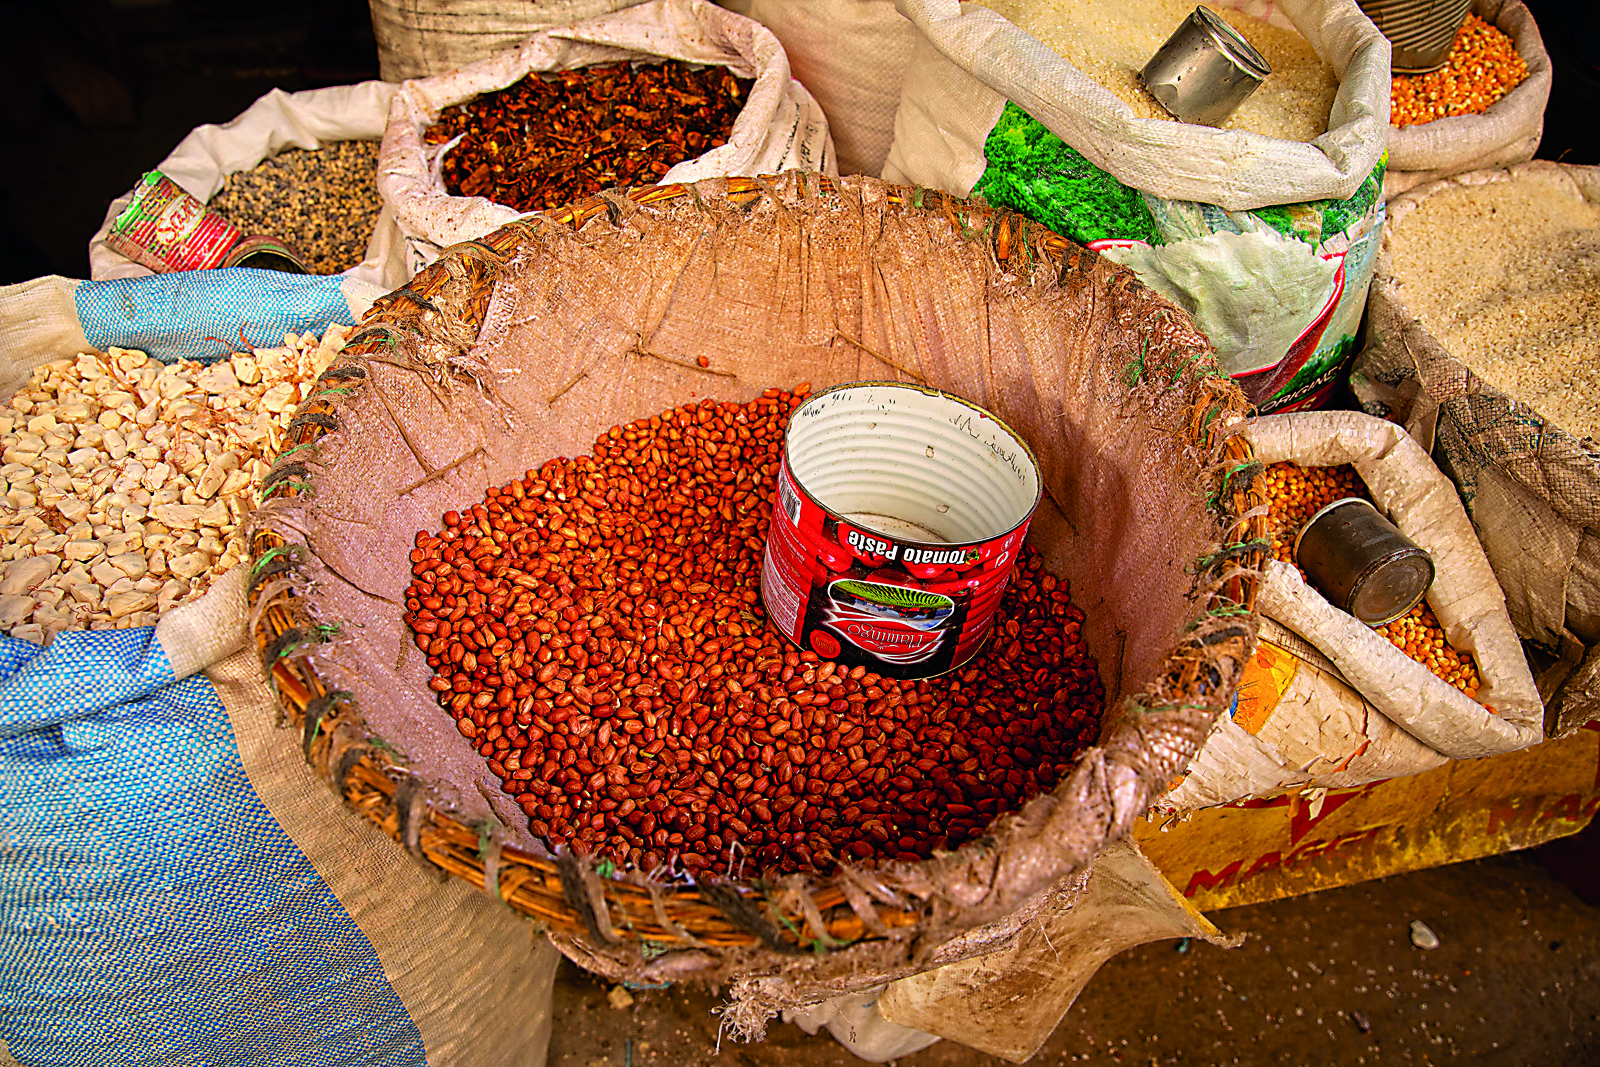 At the market in Brikama, more than 100 vendors sell varieties of husked and unhusked groundnuts, whole and chopped, roasted or raw, and some that are milled into flour or made into peanut butter.